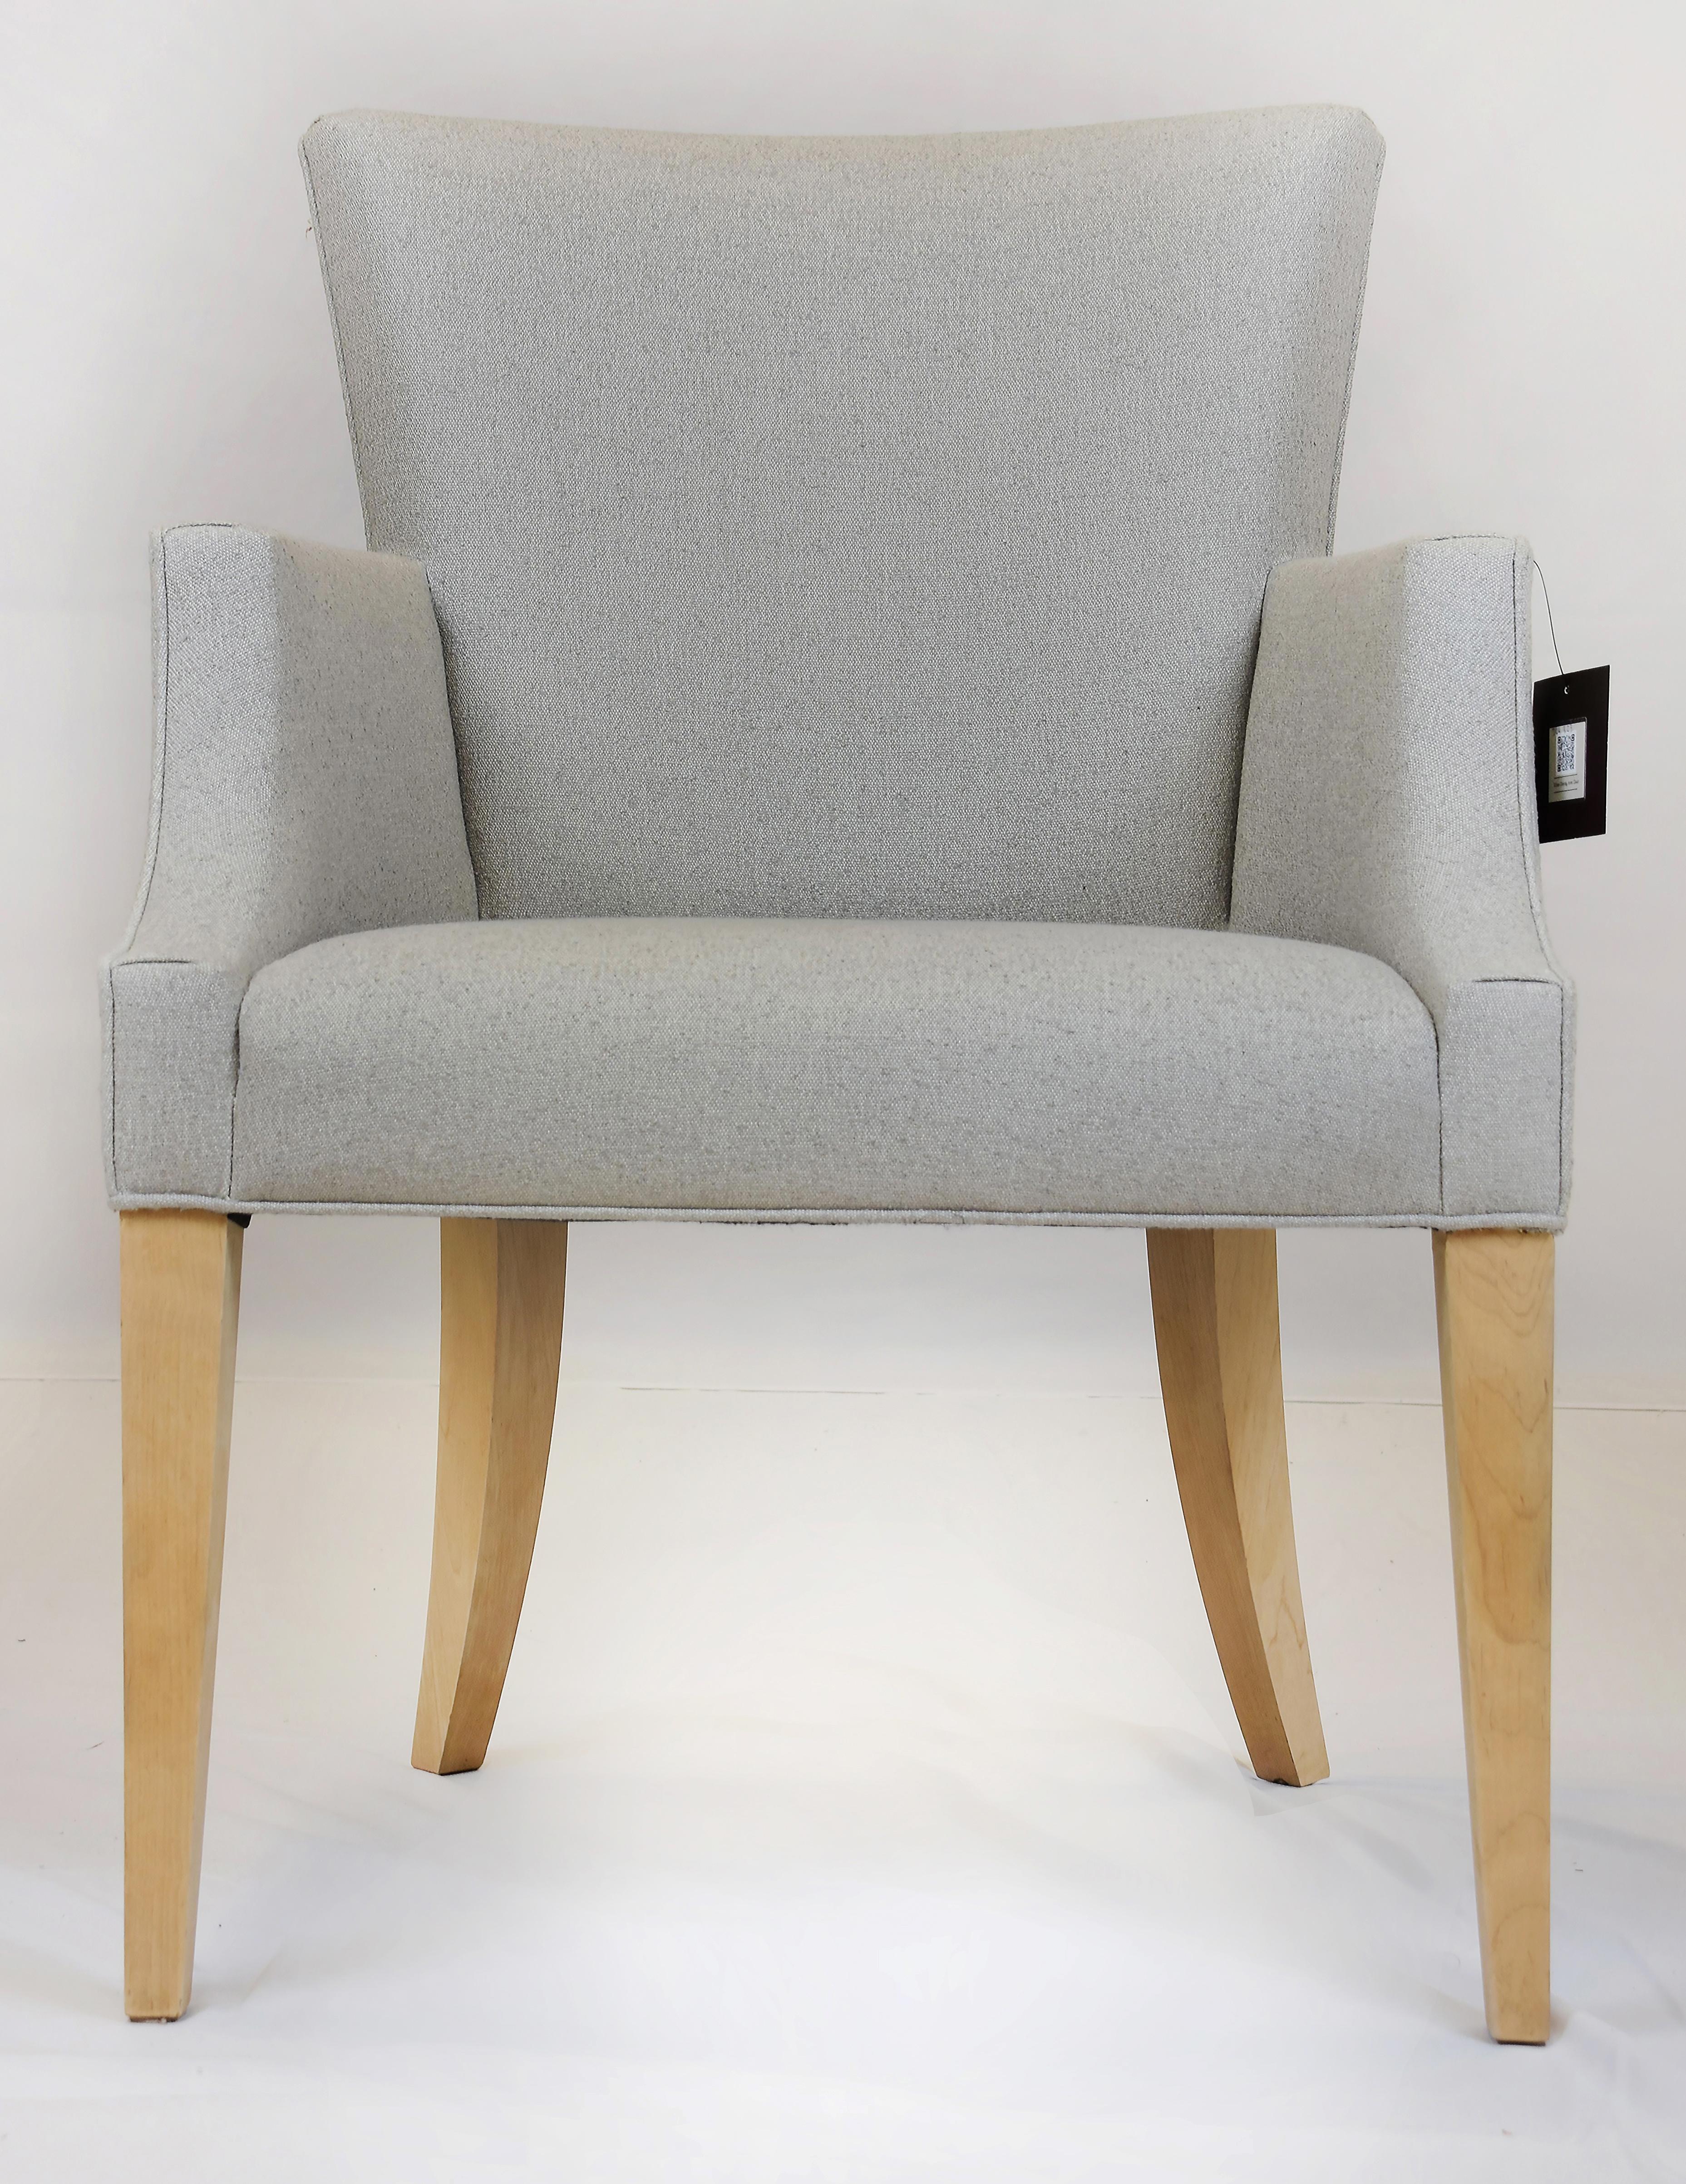  Le Jeune Upholstery Kilani Dining Armchair Showroom Model

Offered for sale is the KILANI DC4.923 showroom model dining armchair from Le Jeune Upholstery. This modern style curved-back dining armchair has thin squared-off arms and is upholstered in